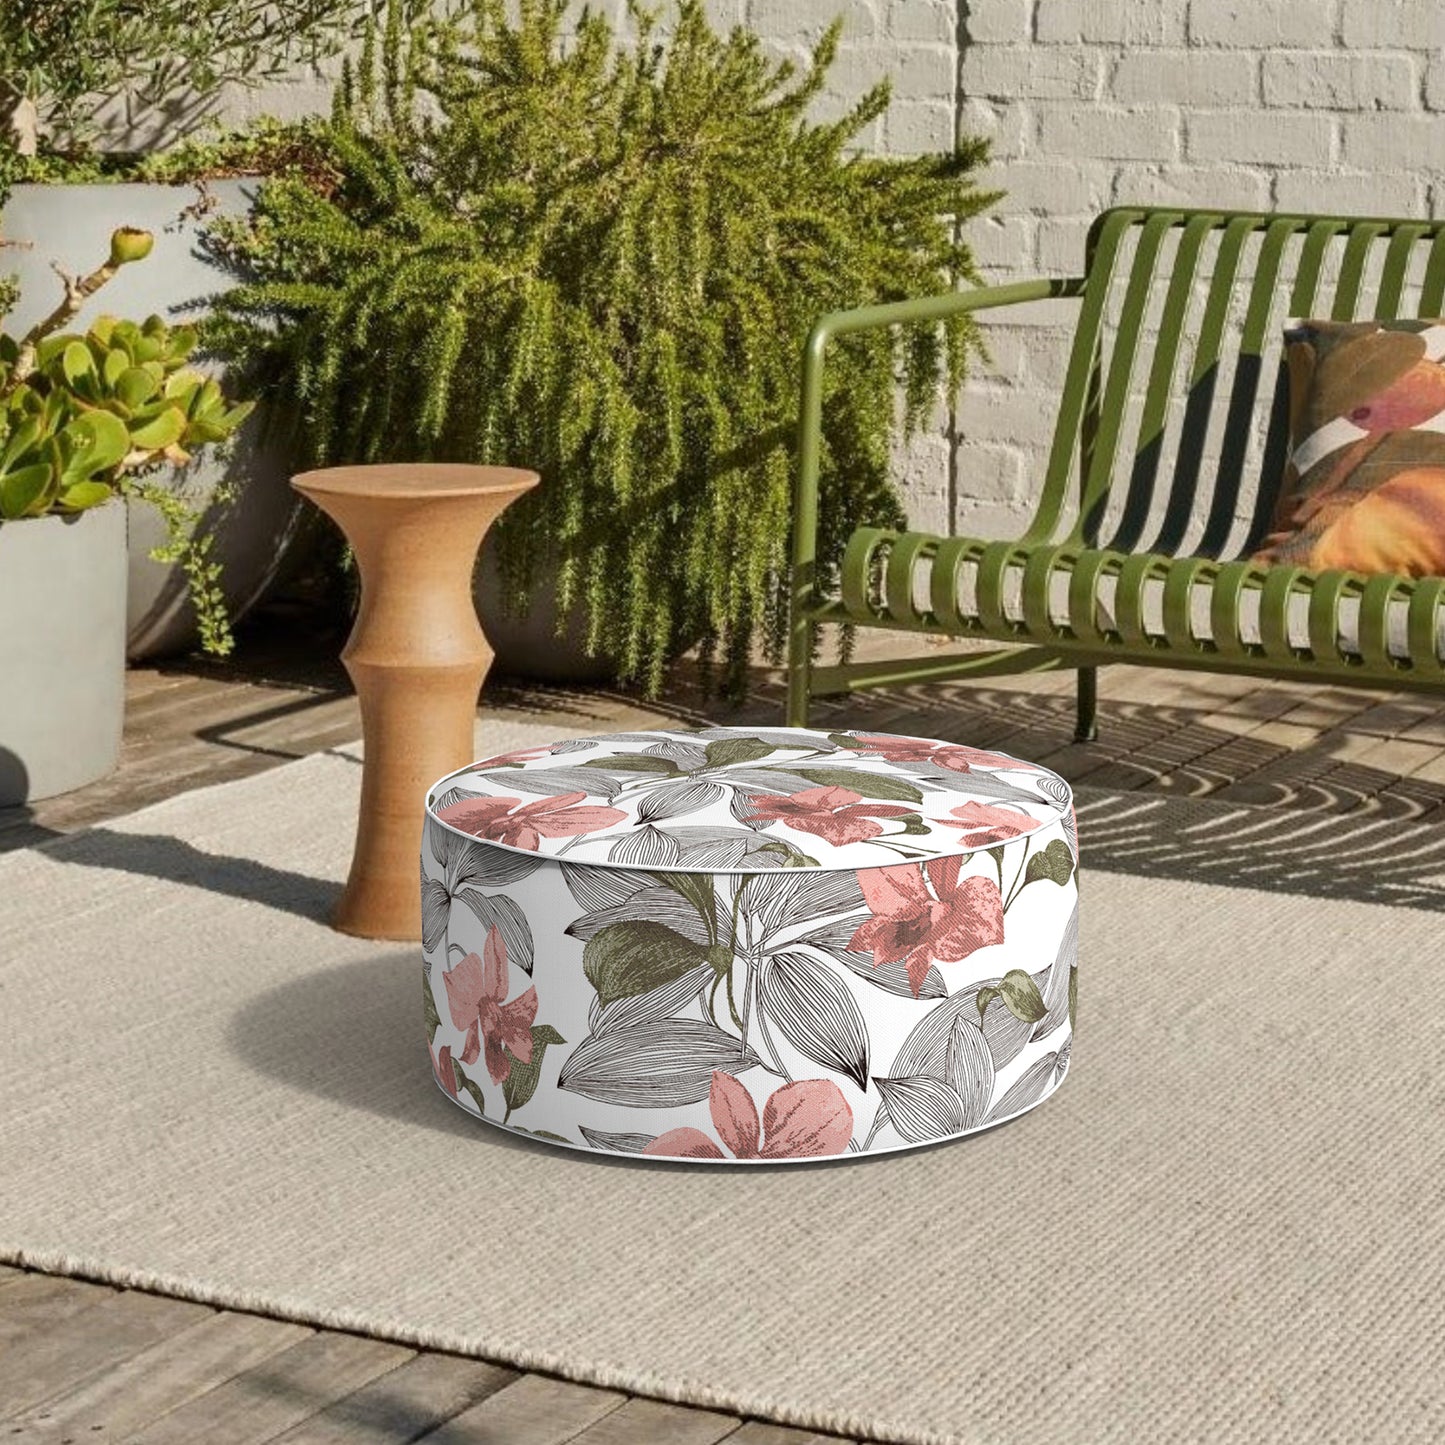 Melody Elephant Patio Inflatable Ottoman, 21x9 Inch Portable Stool Ottoman with Handle, Outdoor Round Footrest Stool for Garden Camping, Clemens Noir Pink